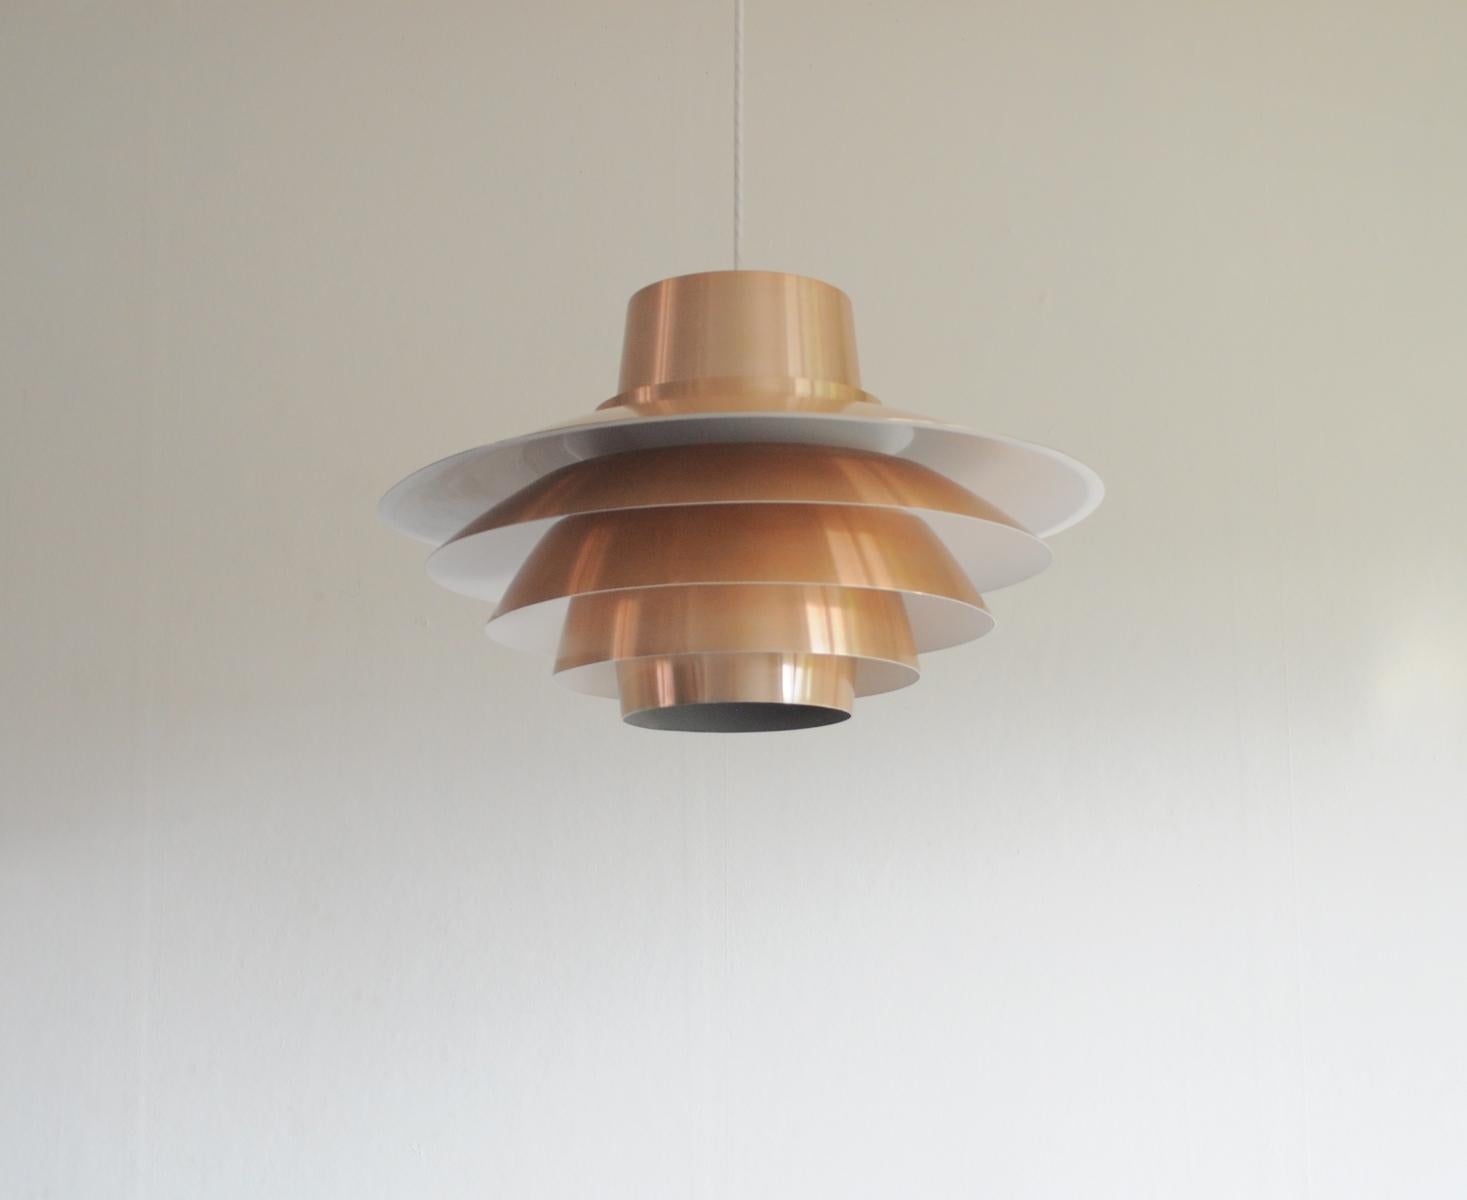 The copper model Verona pendant light was designed by Sven Middelboe and produced by Nordisk Solar in the 1970s. It is constructed from tiers of aluminum which have a copper coating.

Signs of wear consistent with age and use, small scratch see